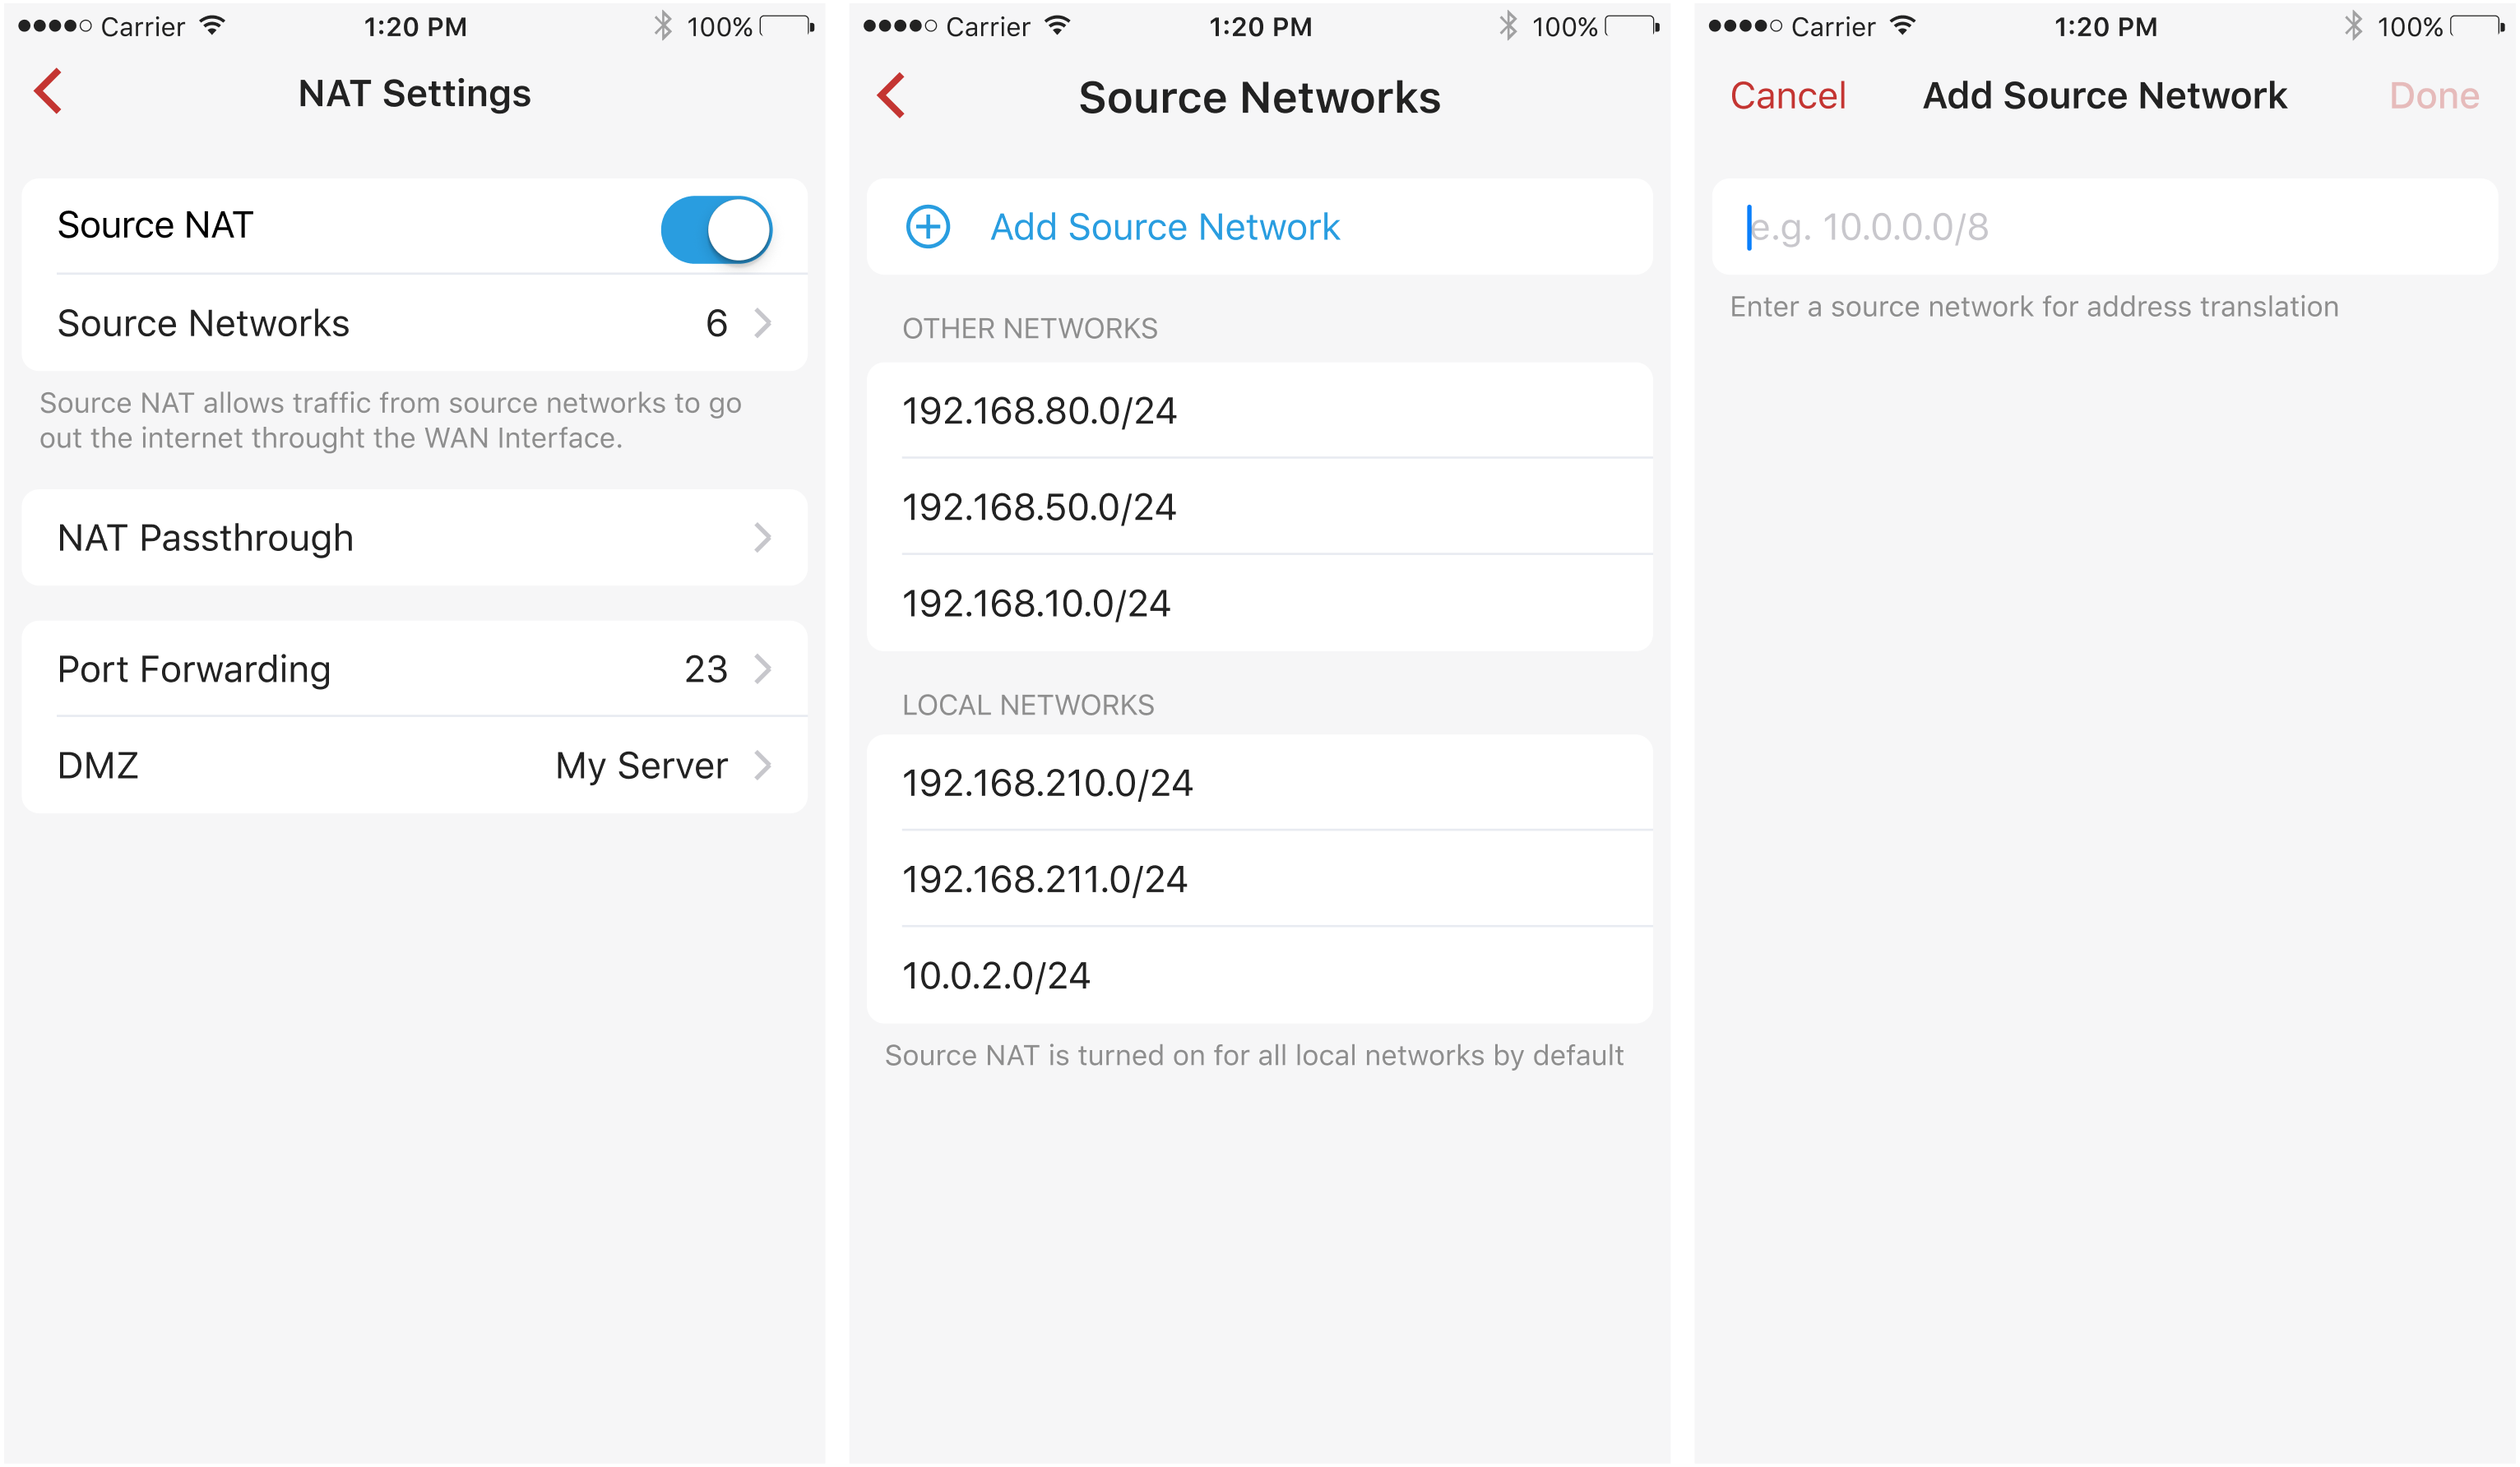 Enhancements such as add a new source network for NAT offered in 1.45 App Release